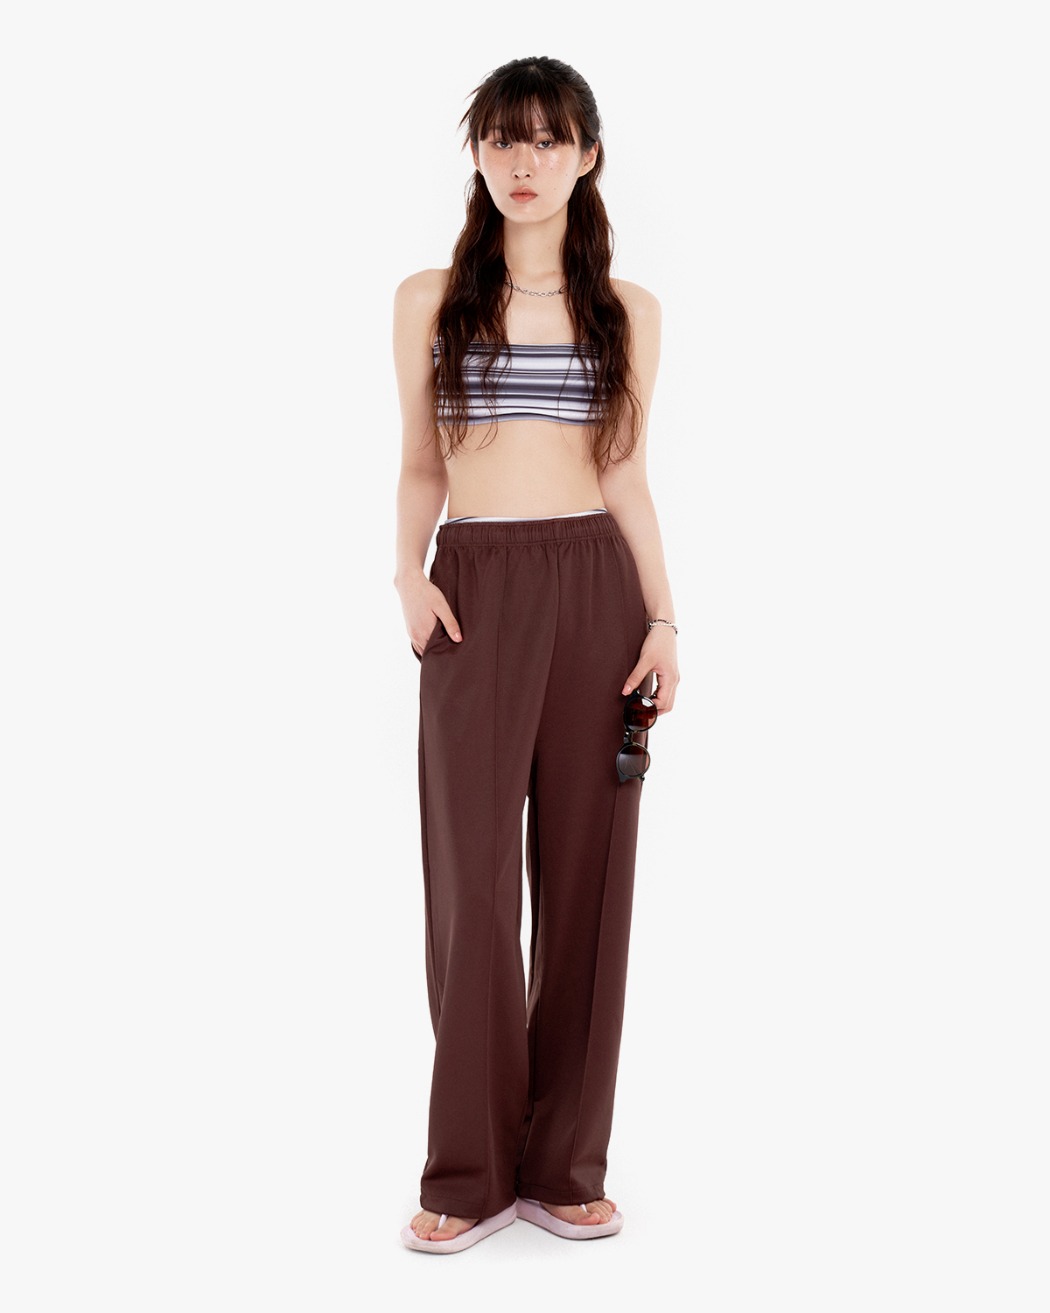 Selected Publications Model Sunyoung, 175 cm | HEIGHTS. | International Store